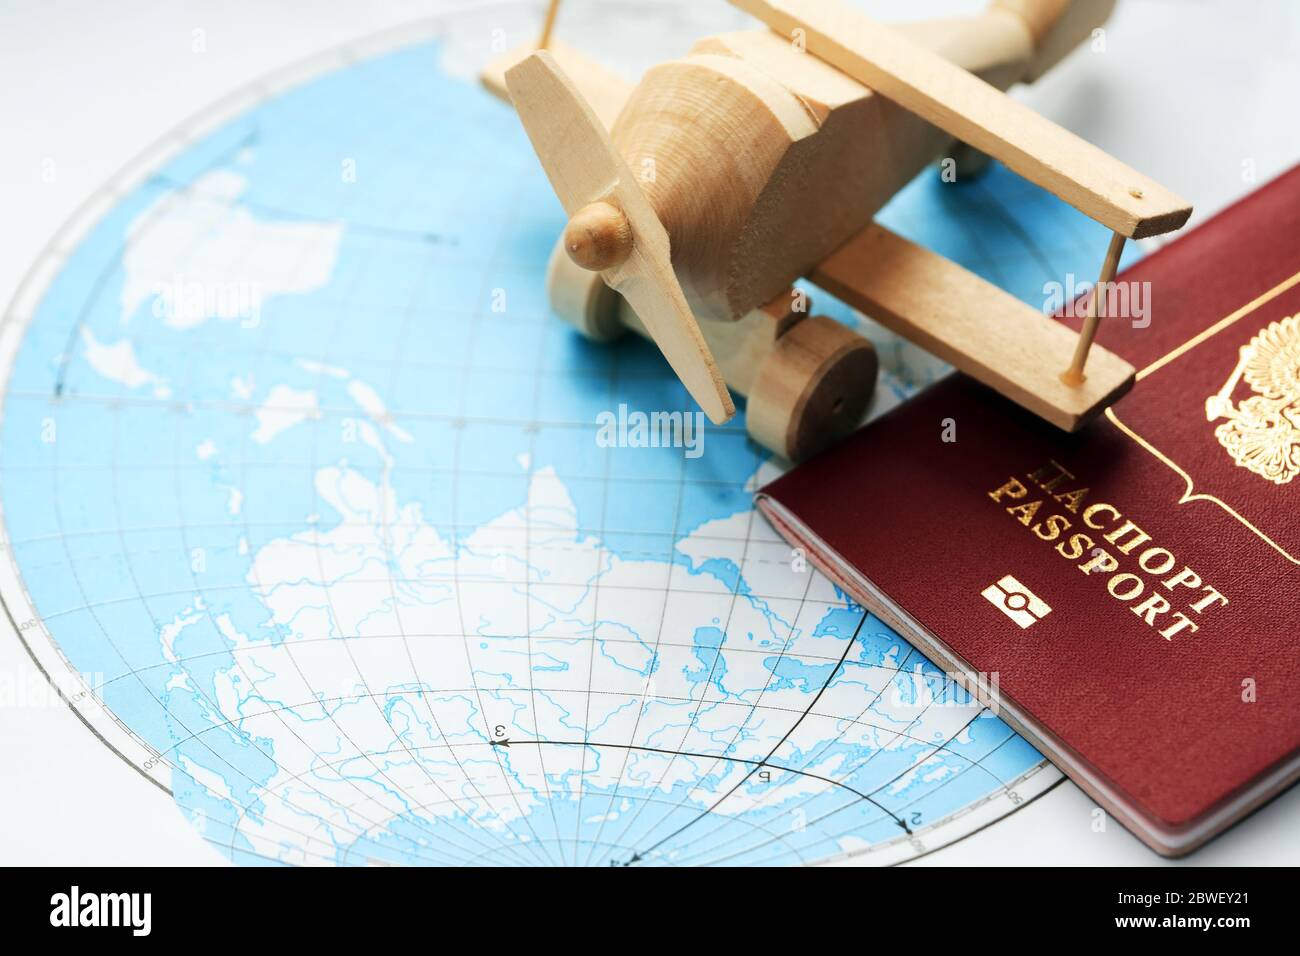 Travel concept. Small wooden airplane on map near passport Stock Photo